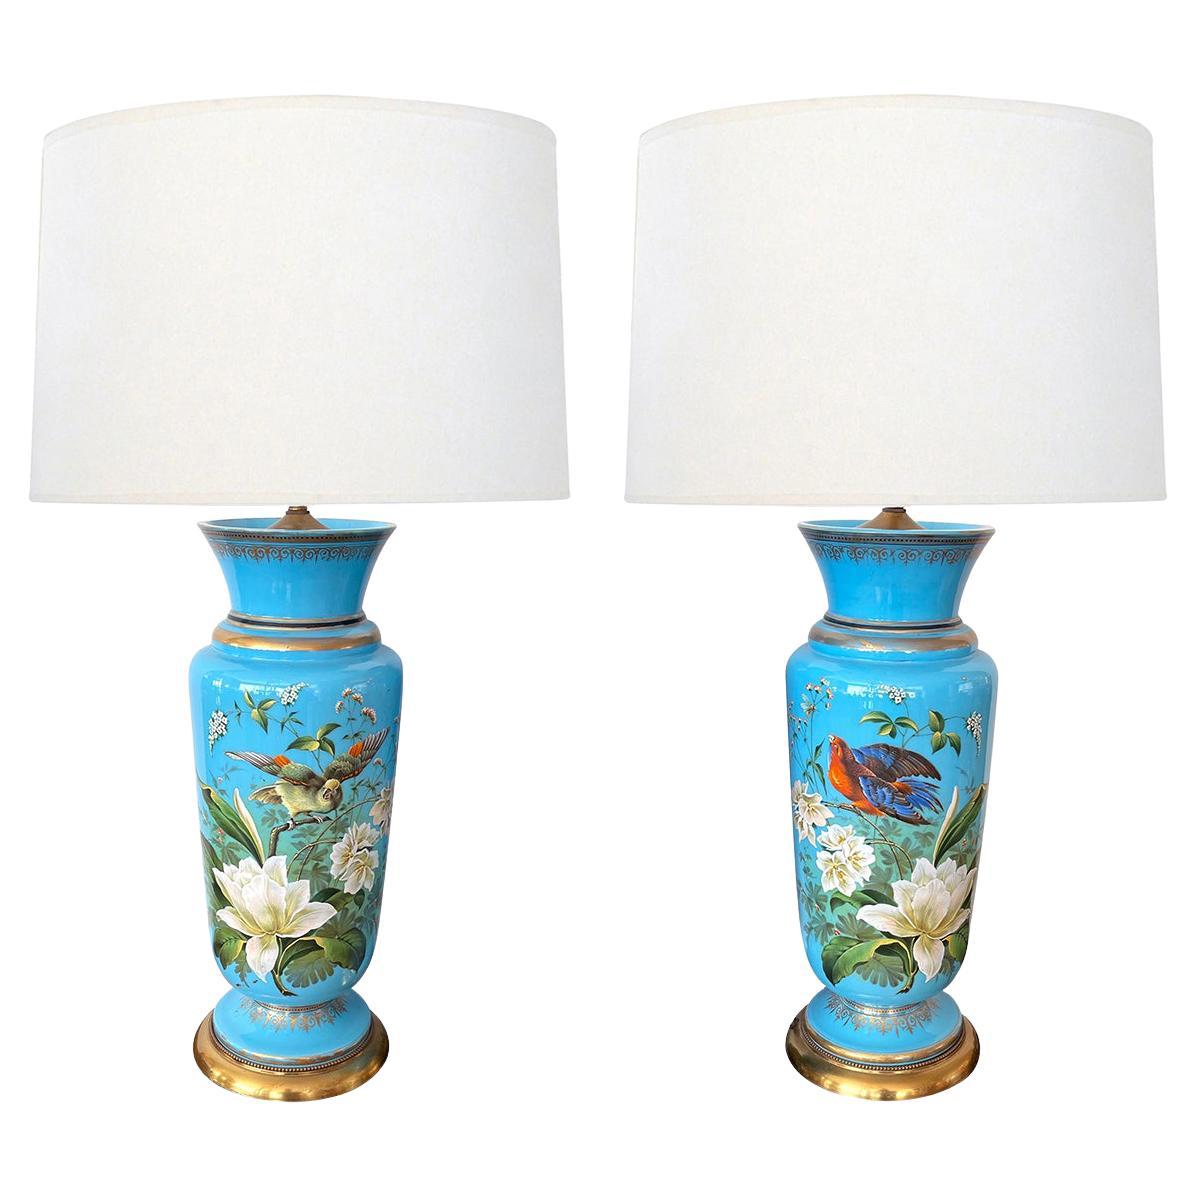 Fine Pair of French Cerulean Blue Opaline Lamps with Polychromed Decoration